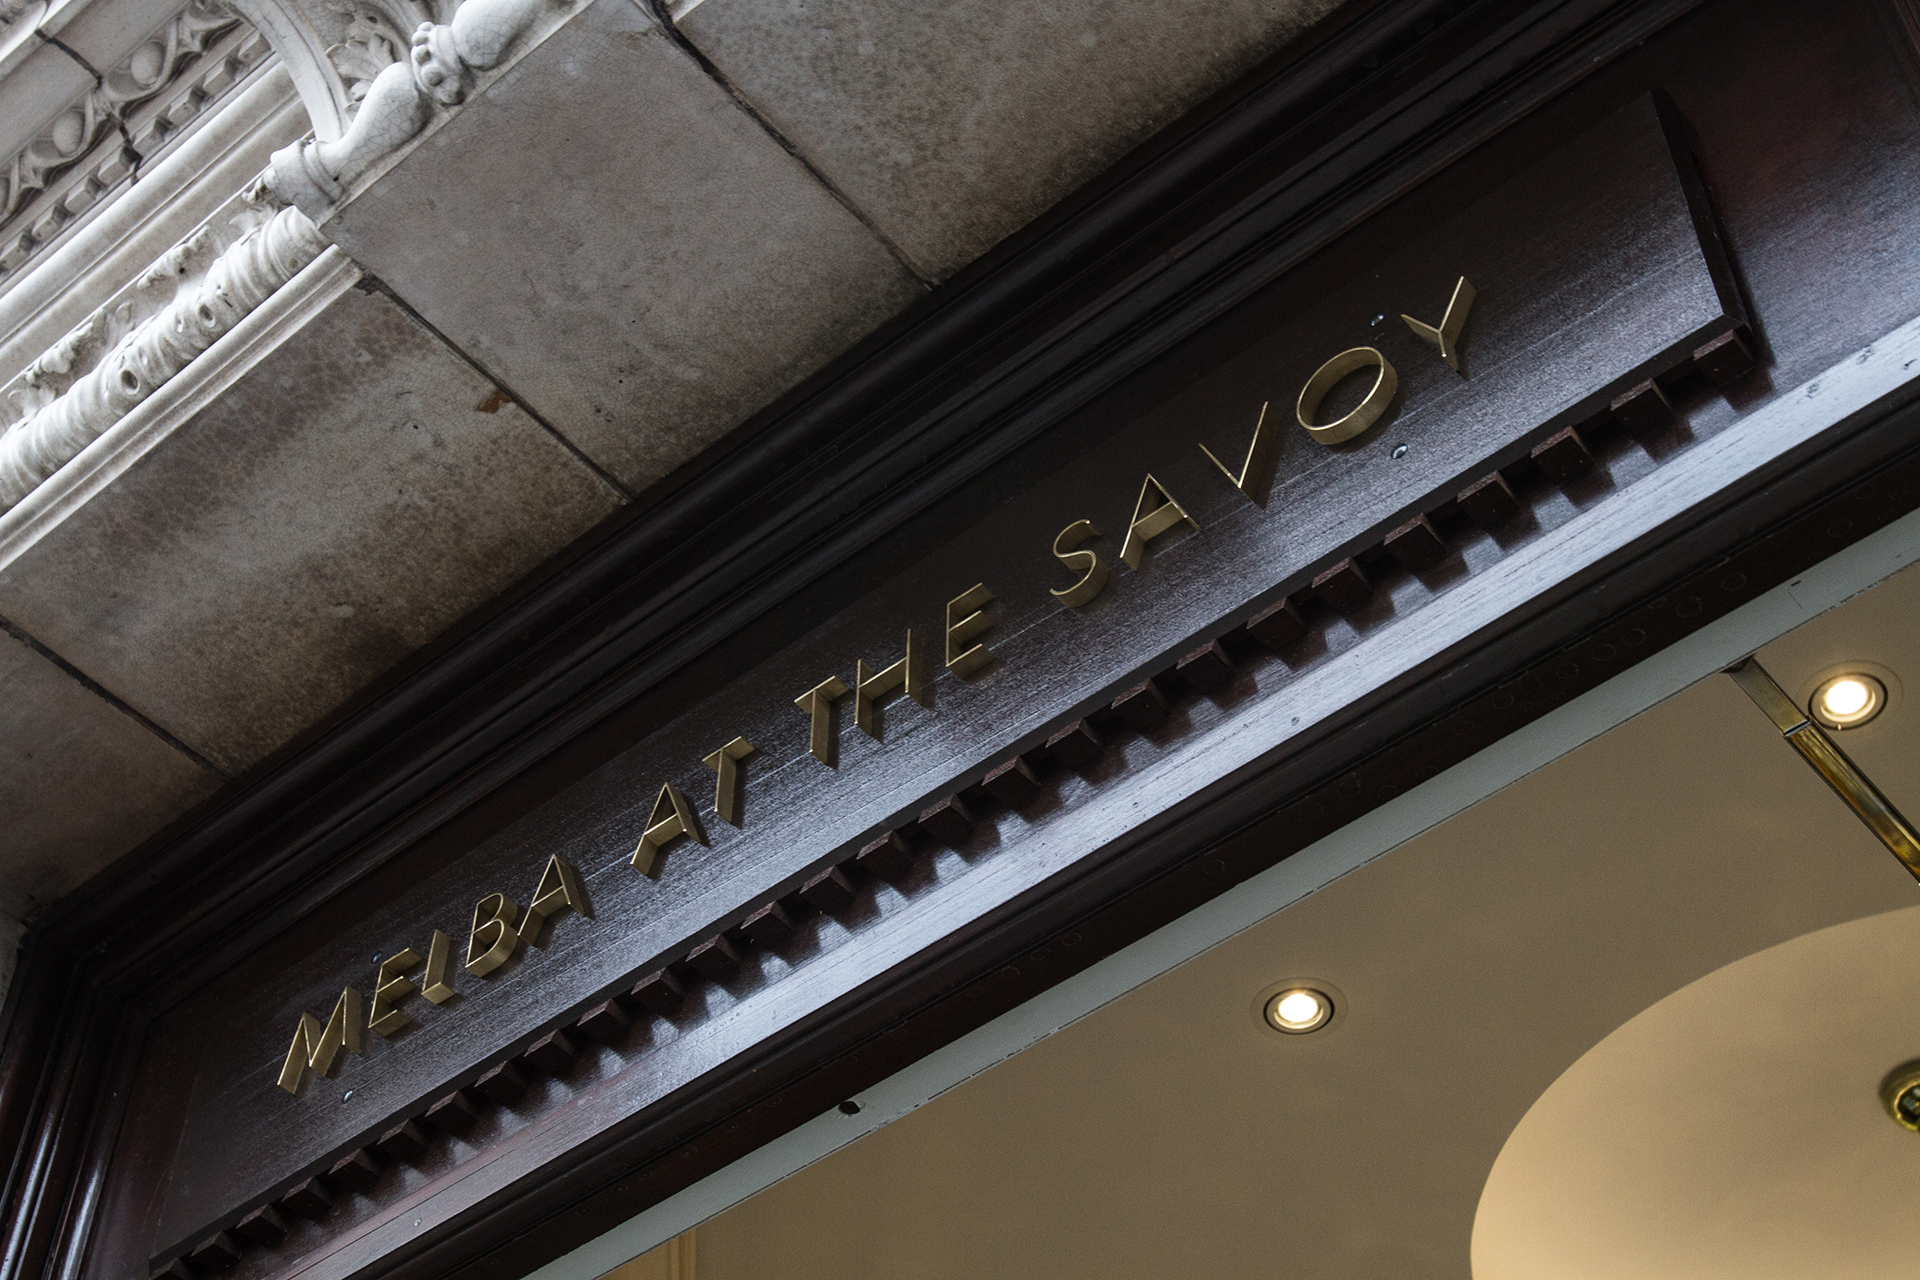 Built up brass lettering for the Melba at the Savoy London